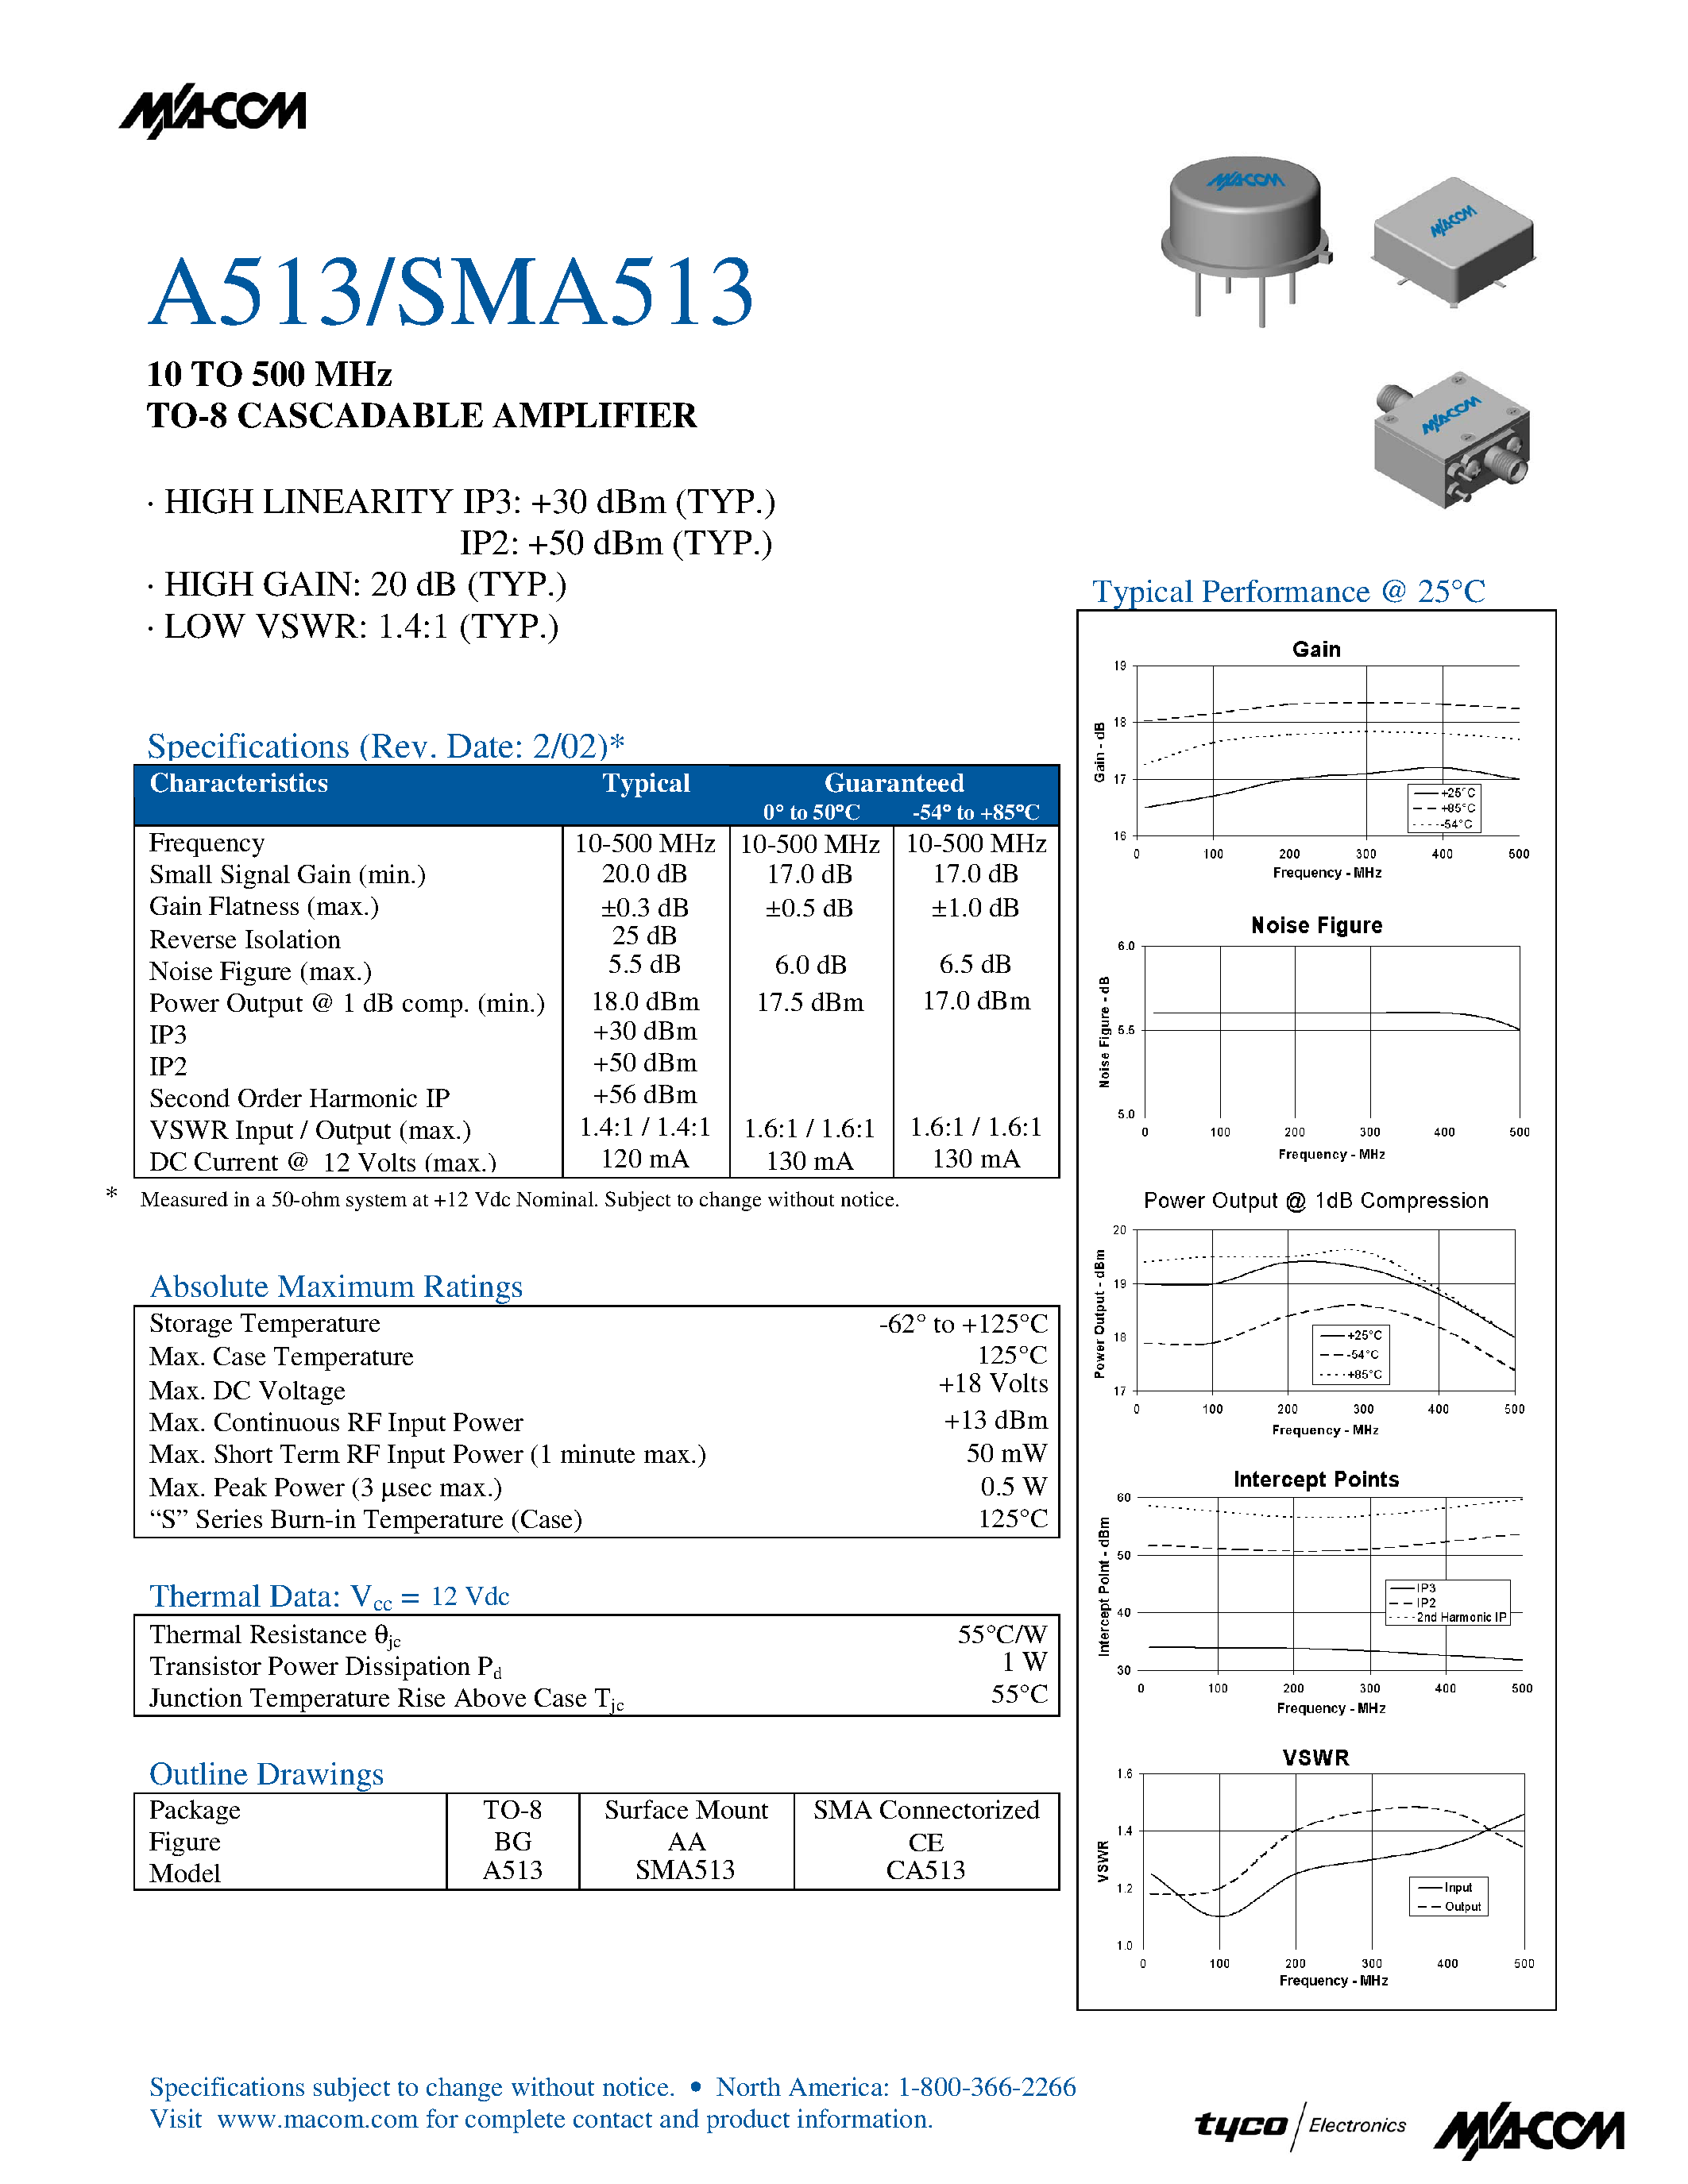 Datasheet A513 - 10 TO 500 MHz TO-8 CASCADABLE AMPLIFIER page 1